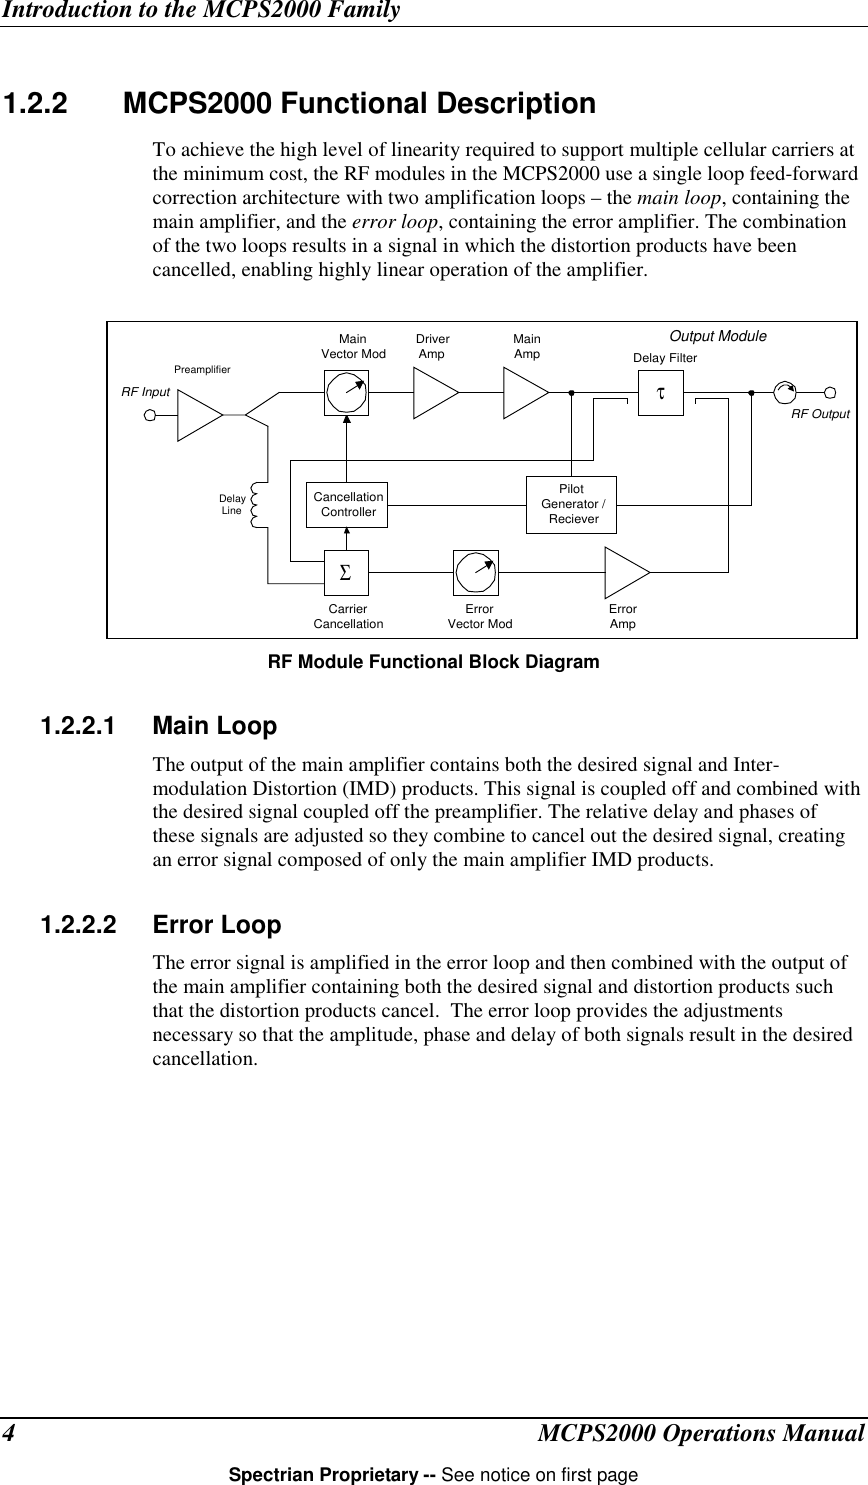 Introduction to the MCPS2000 FamilyMCPS2000 Operations ManualSpectrian Proprietary -- See notice on first page41.2.2   MCPS2000 Functional DescriptionTo achieve the high level of linearity required to support multiple cellular carriers atthe minimum cost, the RF modules in the MCPS2000 use a single loop feed-forwardcorrection architecture with two amplification loops – the main loop, containing themain amplifier, and the error loop, containing the error amplifier. The combinationof the two loops results in a signal in which the distortion products have beencancelled, enabling highly linear operation of the amplifier.RF Module Functional Block Diagram1.2.2.1 Main LoopThe output of the main amplifier contains both the desired signal and Inter-modulation Distortion (IMD) products. This signal is coupled off and combined withthe desired signal coupled off the preamplifier. The relative delay and phases ofthese signals are adjusted so they combine to cancel out the desired signal, creatingan error signal composed of only the main amplifier IMD products.1.2.2.2 Error LoopThe error signal is amplified in the error loop and then combined with the output ofthe main amplifier containing both the desired signal and distortion products suchthat the distortion products cancel.  The error loop provides the adjustmentsnecessary so that the amplitude, phase and delay of both signals result in the desiredcancellation.MainVector Mod DriverAmp MainAmp Delay FilterOutput ModulePilotGenerator /RecieverCancellationControllerCarrierCancellation ErrorVector ModΣτPreamplifierDelayLineErrorAmpRF InputRF Output